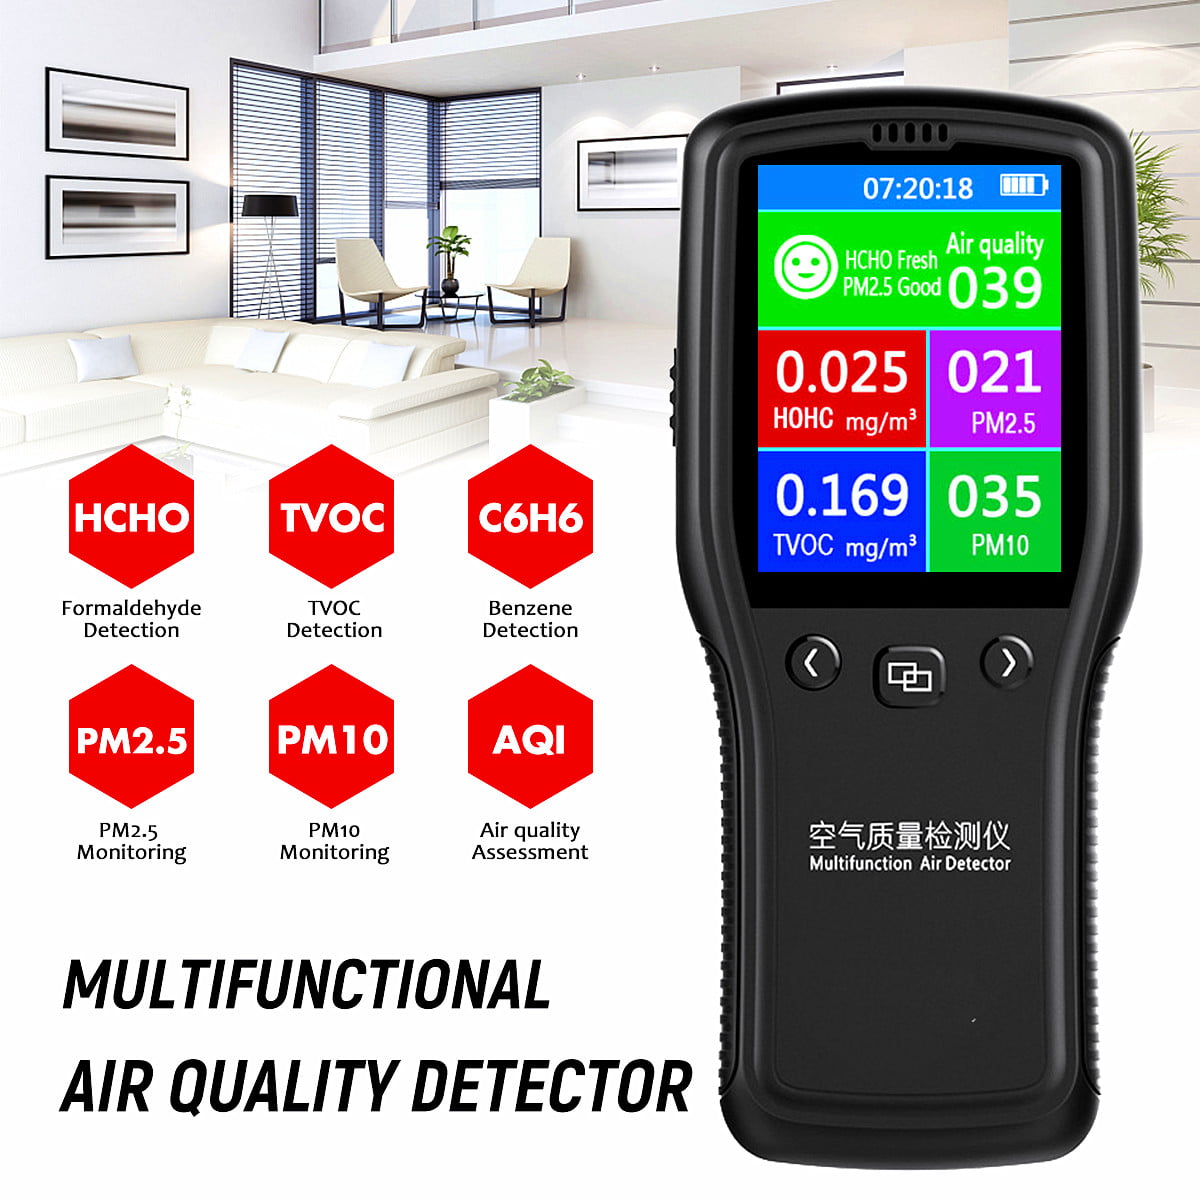 Romantic PresentFormaldehyde Monitor Air 3 Inch Screen for Conference Room Office High Accuracy Temperature Monitor C6H6 Monitoring Formaldehyde Detector 